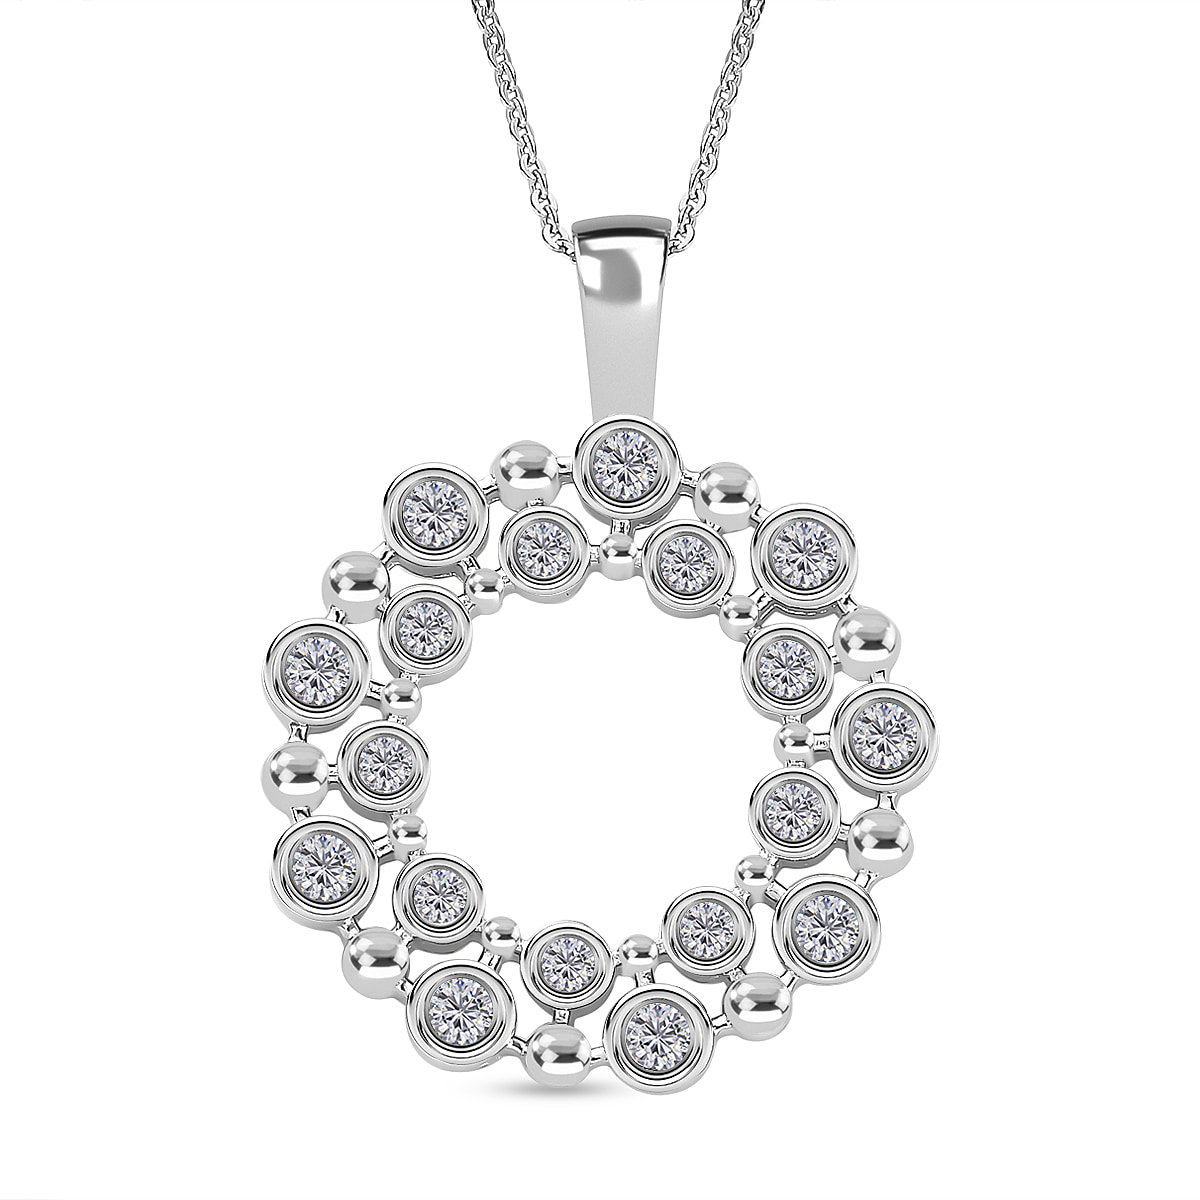 Moissanite Bubble Pendant with Chain (Size 20) in Platinum Overlay Sterling Silver, Silver Wt 5.40 Gms